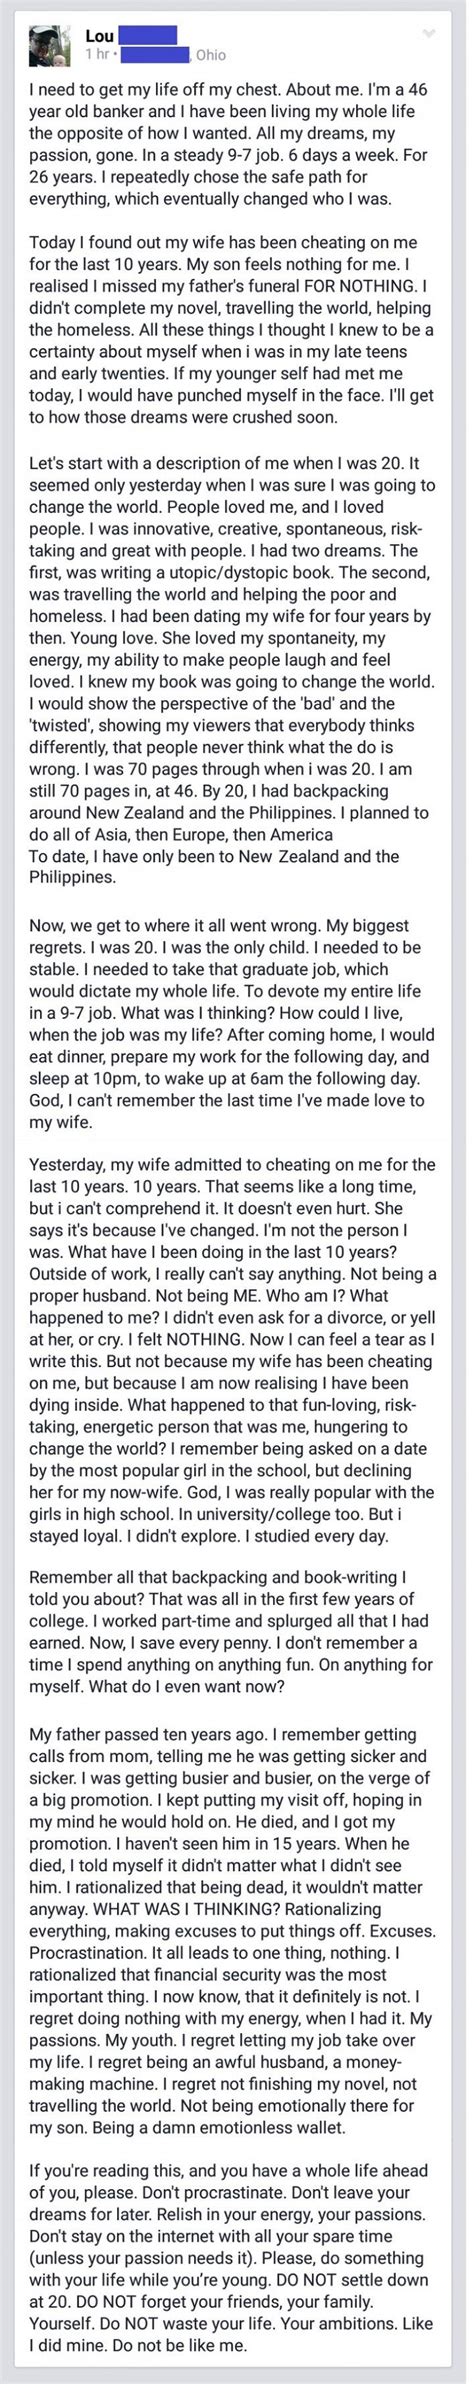 A Man Discovers That His Wife Has Been Cheating For 10 Years But He